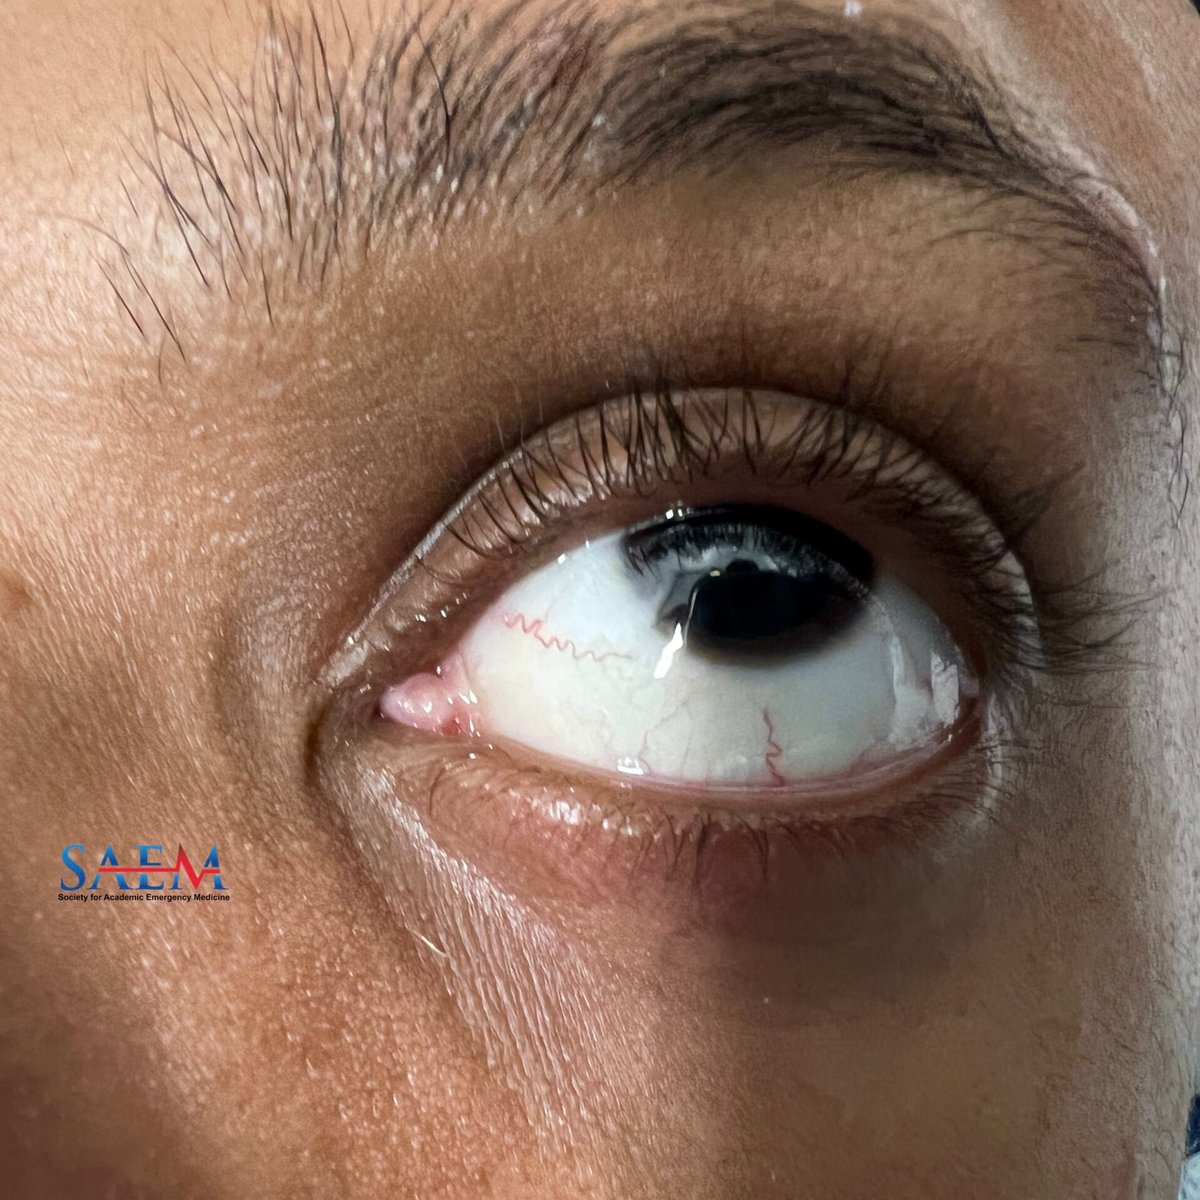 SAEM Clinical Images Series: Not Your Usual Irritated Eye Eye irritation in the setting of facial rash requires a full eye exam for possible ocular involvement. aliem.com/saem-clinical-…